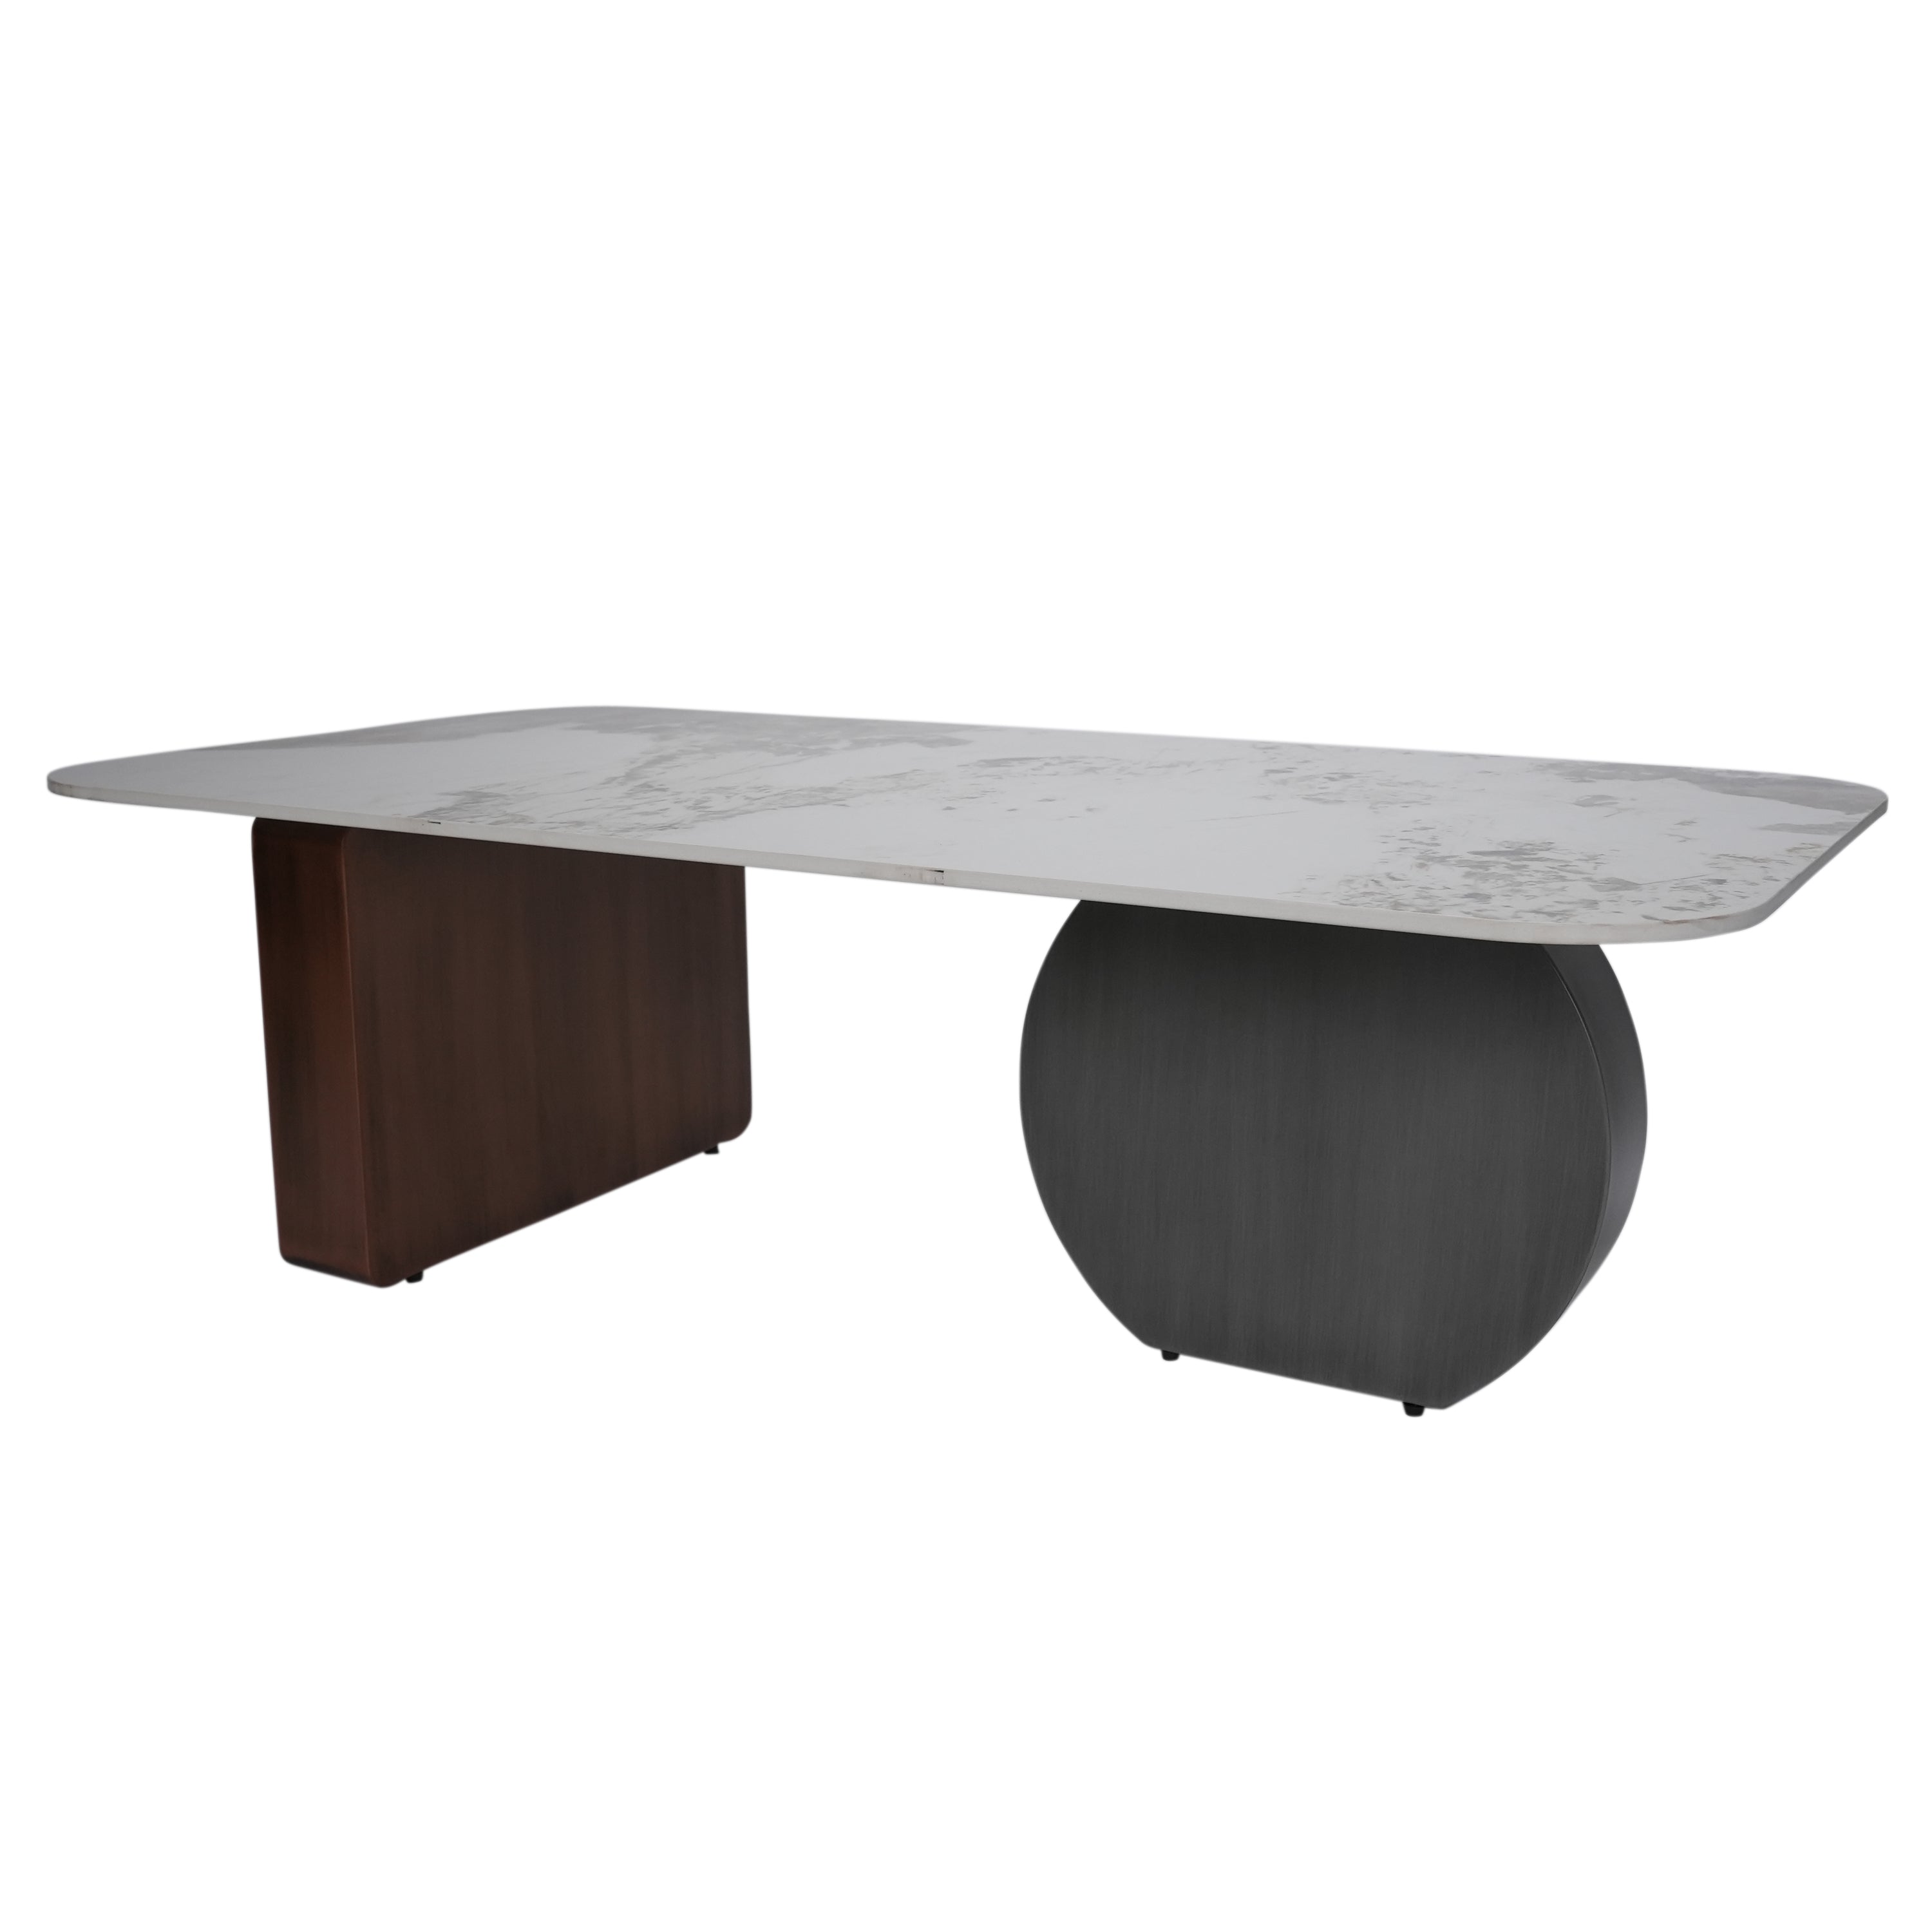 Ohio Center Table With Marble Top And Iron Base